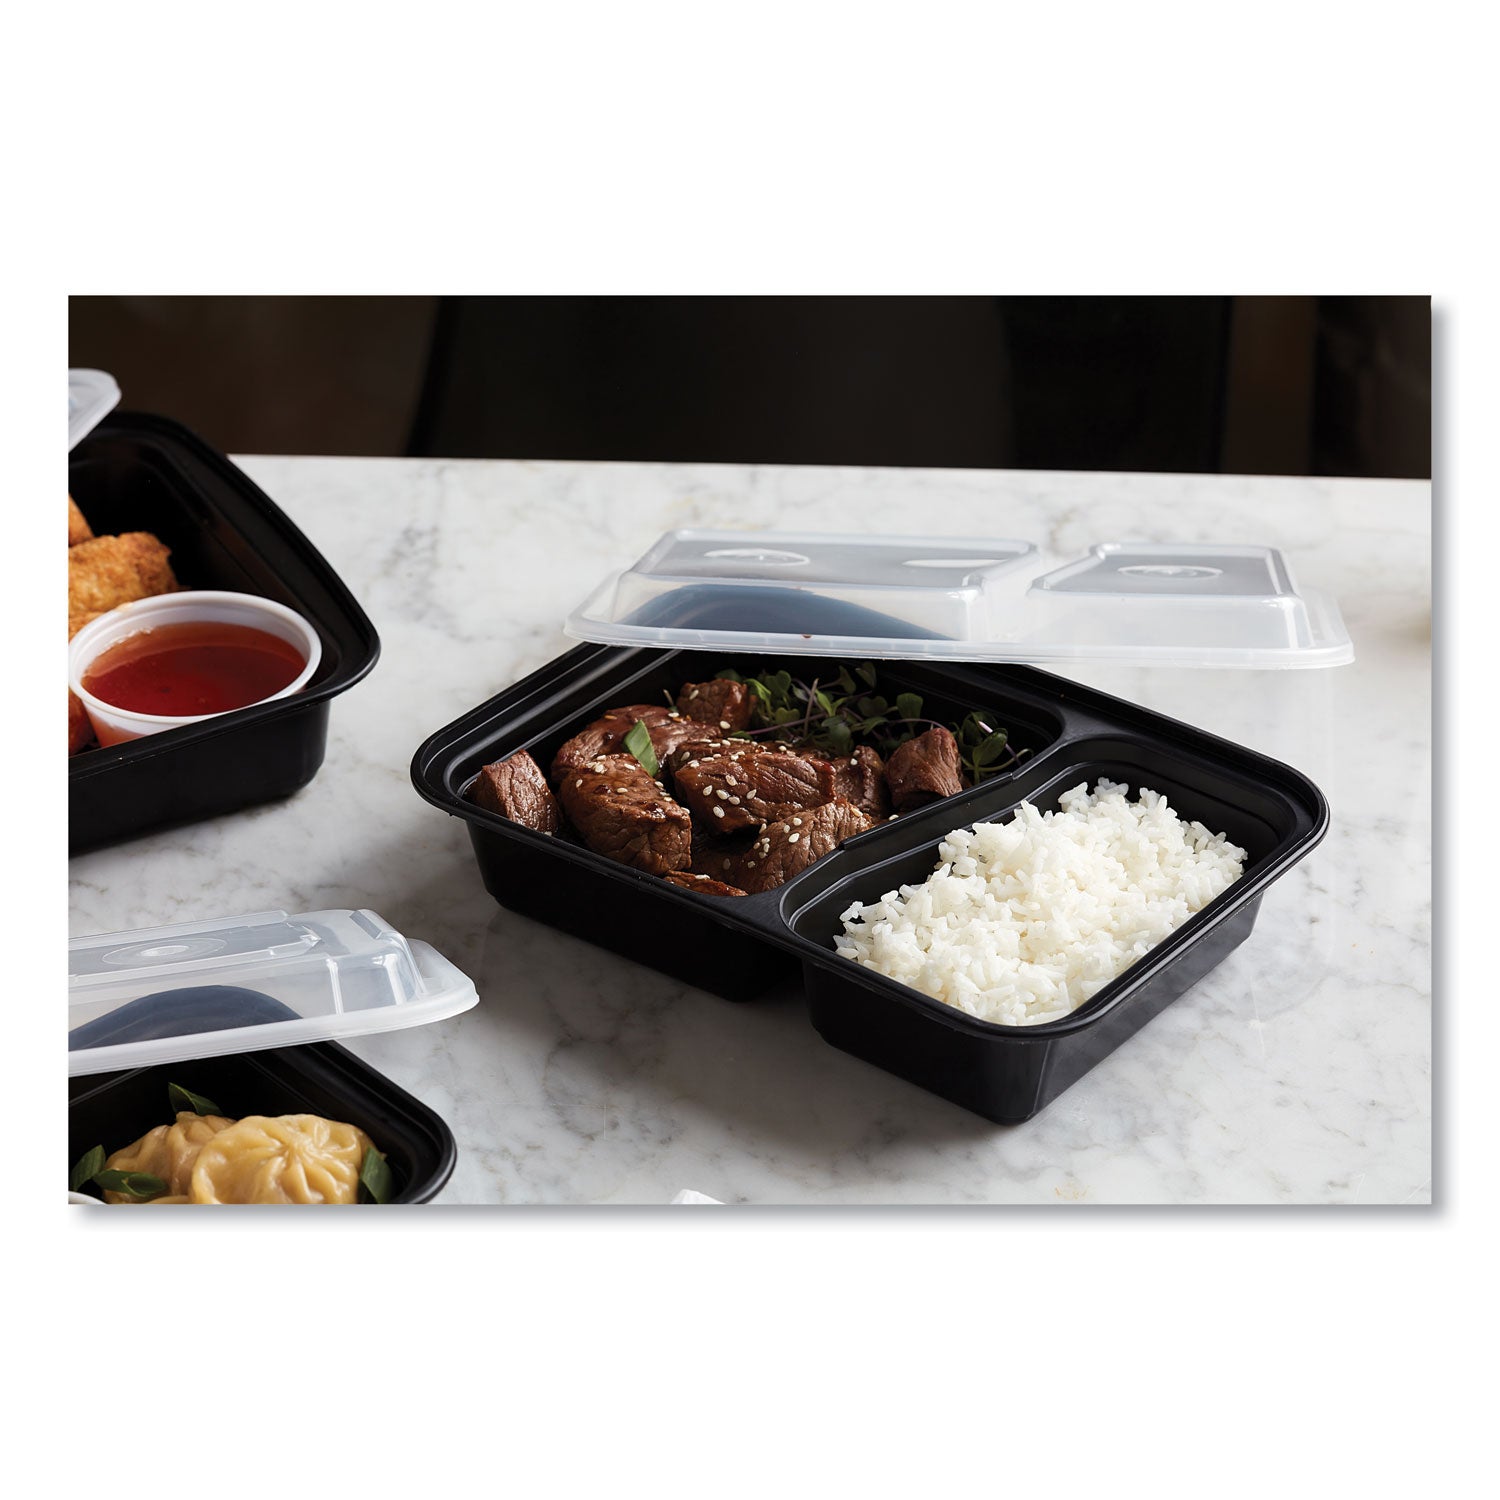 newspring-versatainer-microwavable-containers-rectangular-2-compartment-30-oz-6-x-85-x-25-black-clear-plastic-150-ct_pctnc8288b - 2